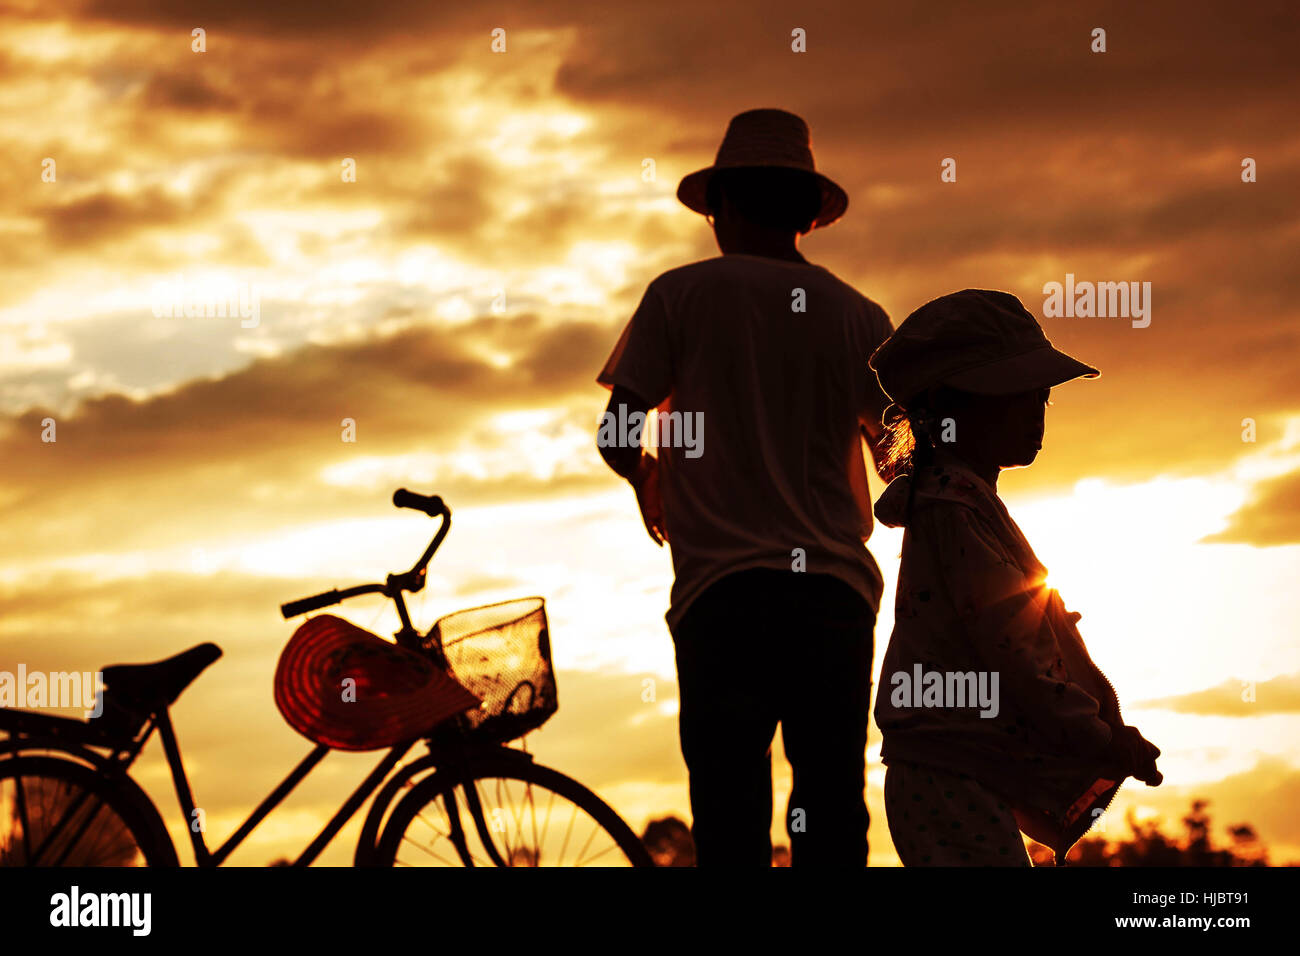 Father and son standing back with silhouettes at sunset. Stock Photo